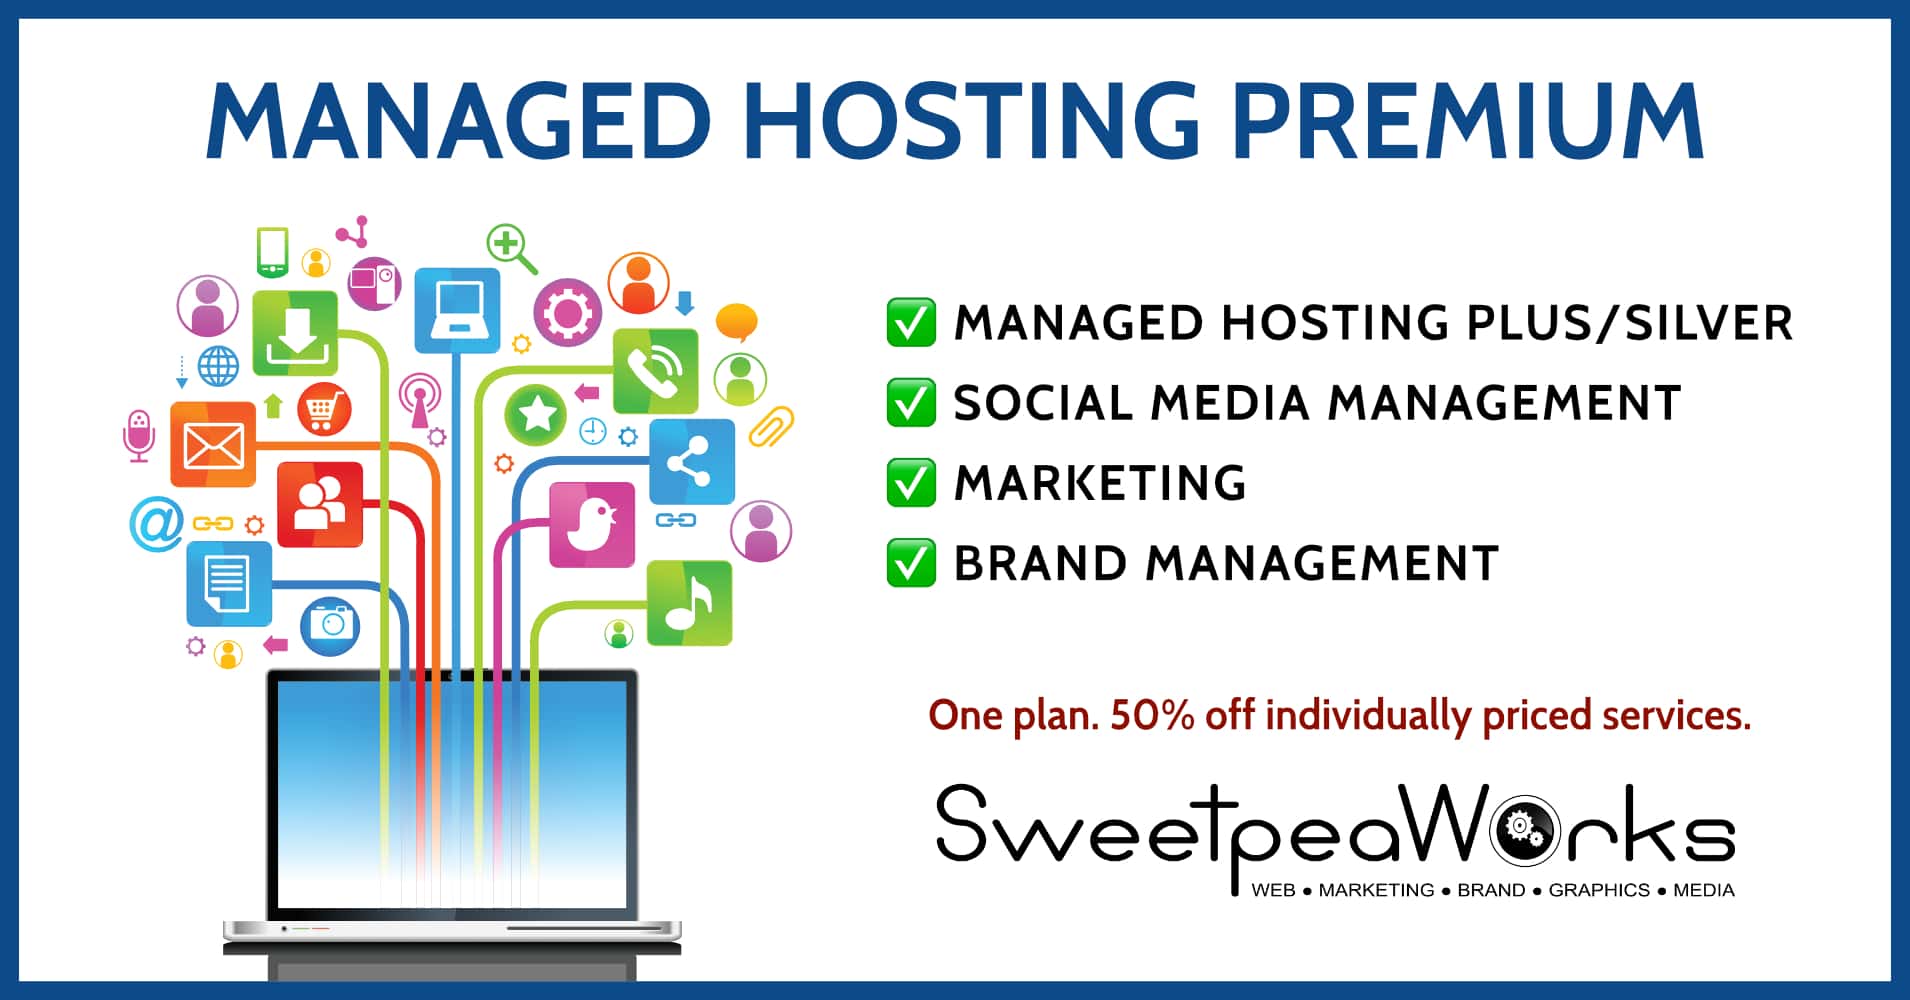 Promotional graphic for managed hosting services featuring discounts and included digital marketing tools.